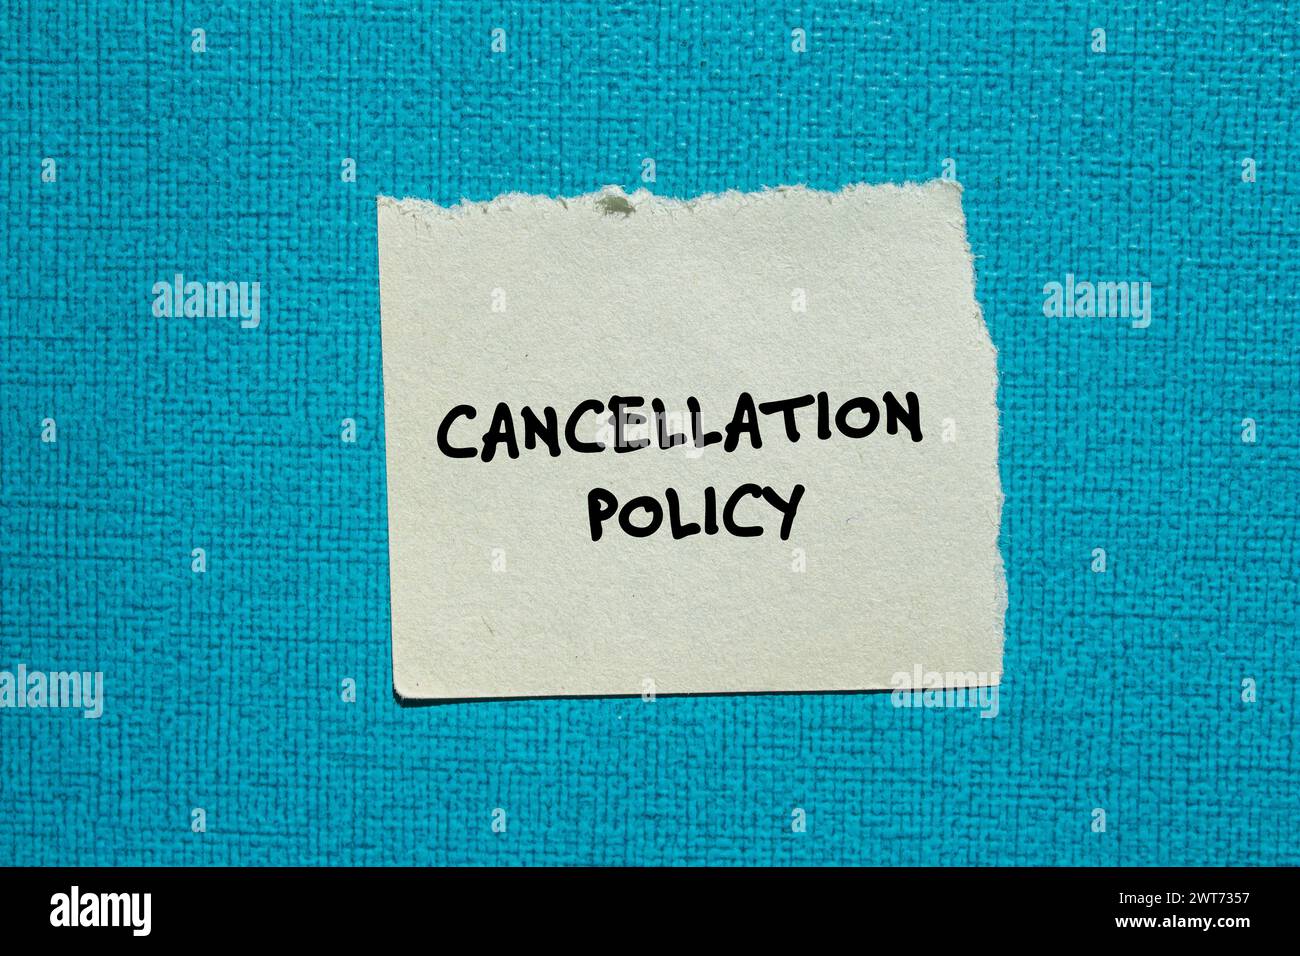 Cancellation policy words written on torn paper piece with blue background. Conceptual symbol. Copy space. Stock Photo